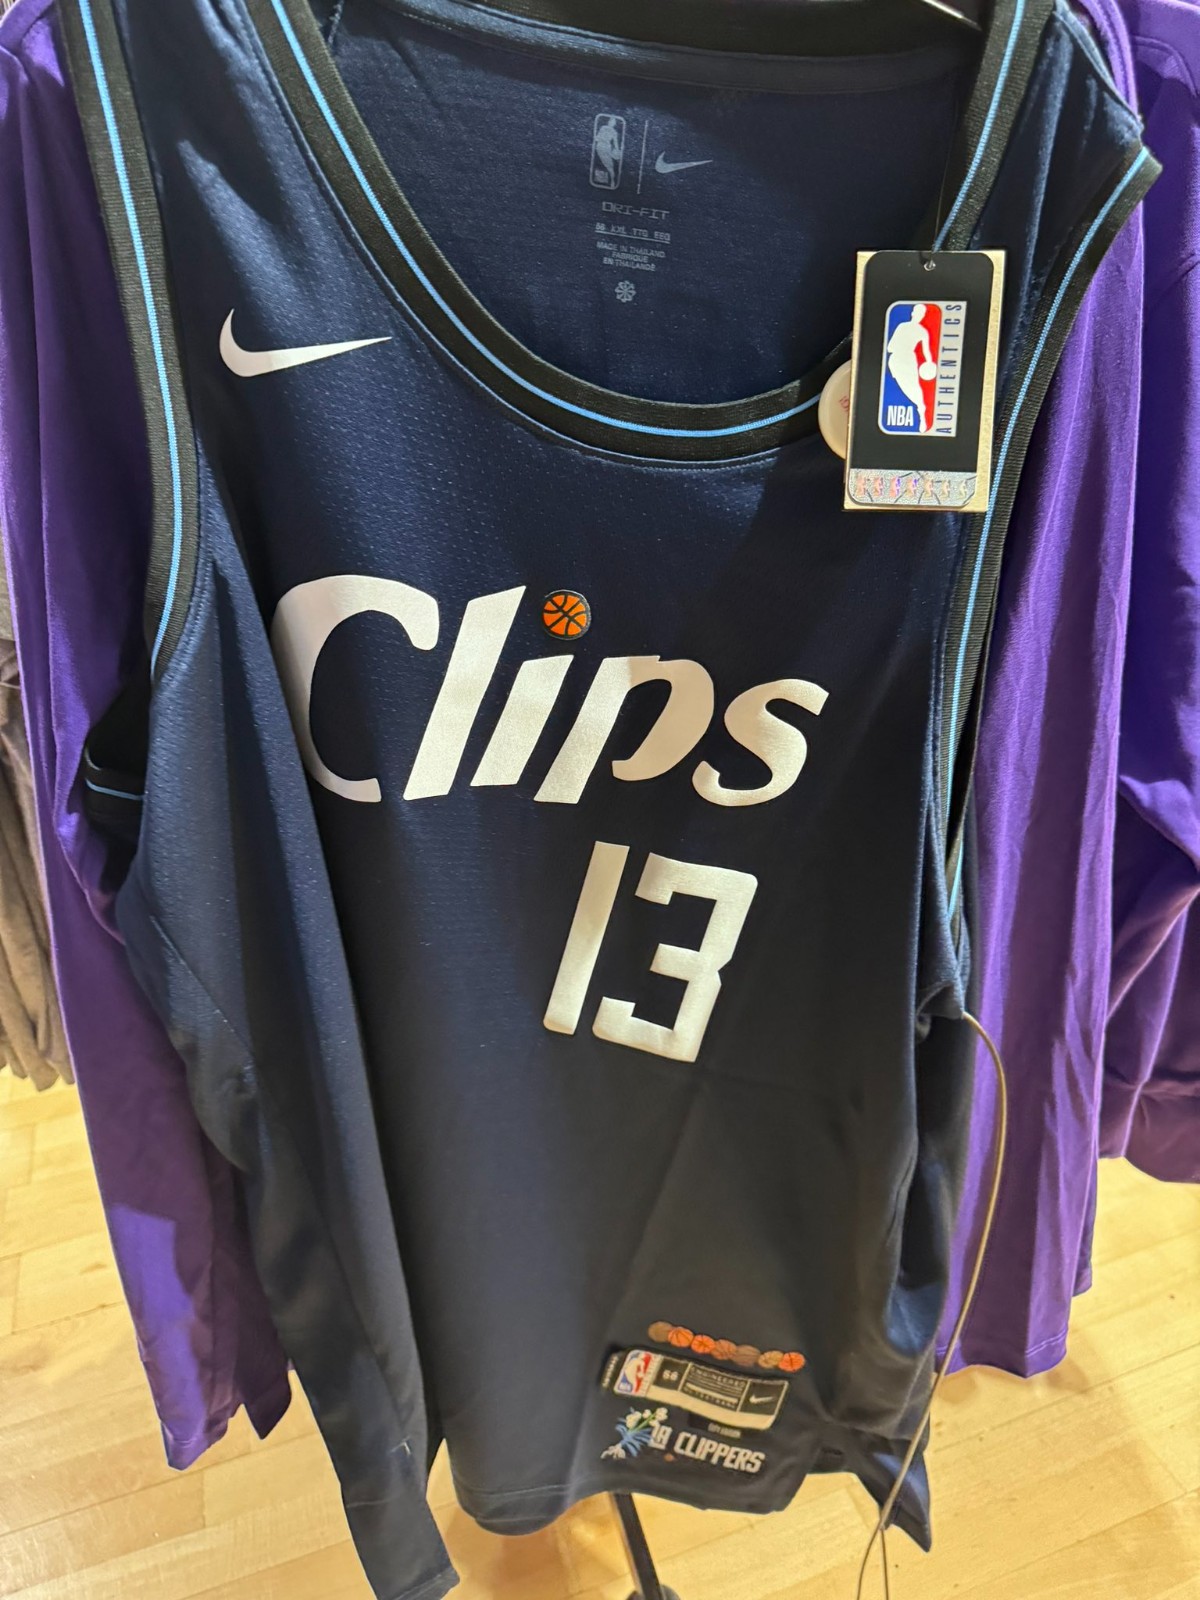 Clippers City Edition Jersey 2022-23: Saluting the Drew League